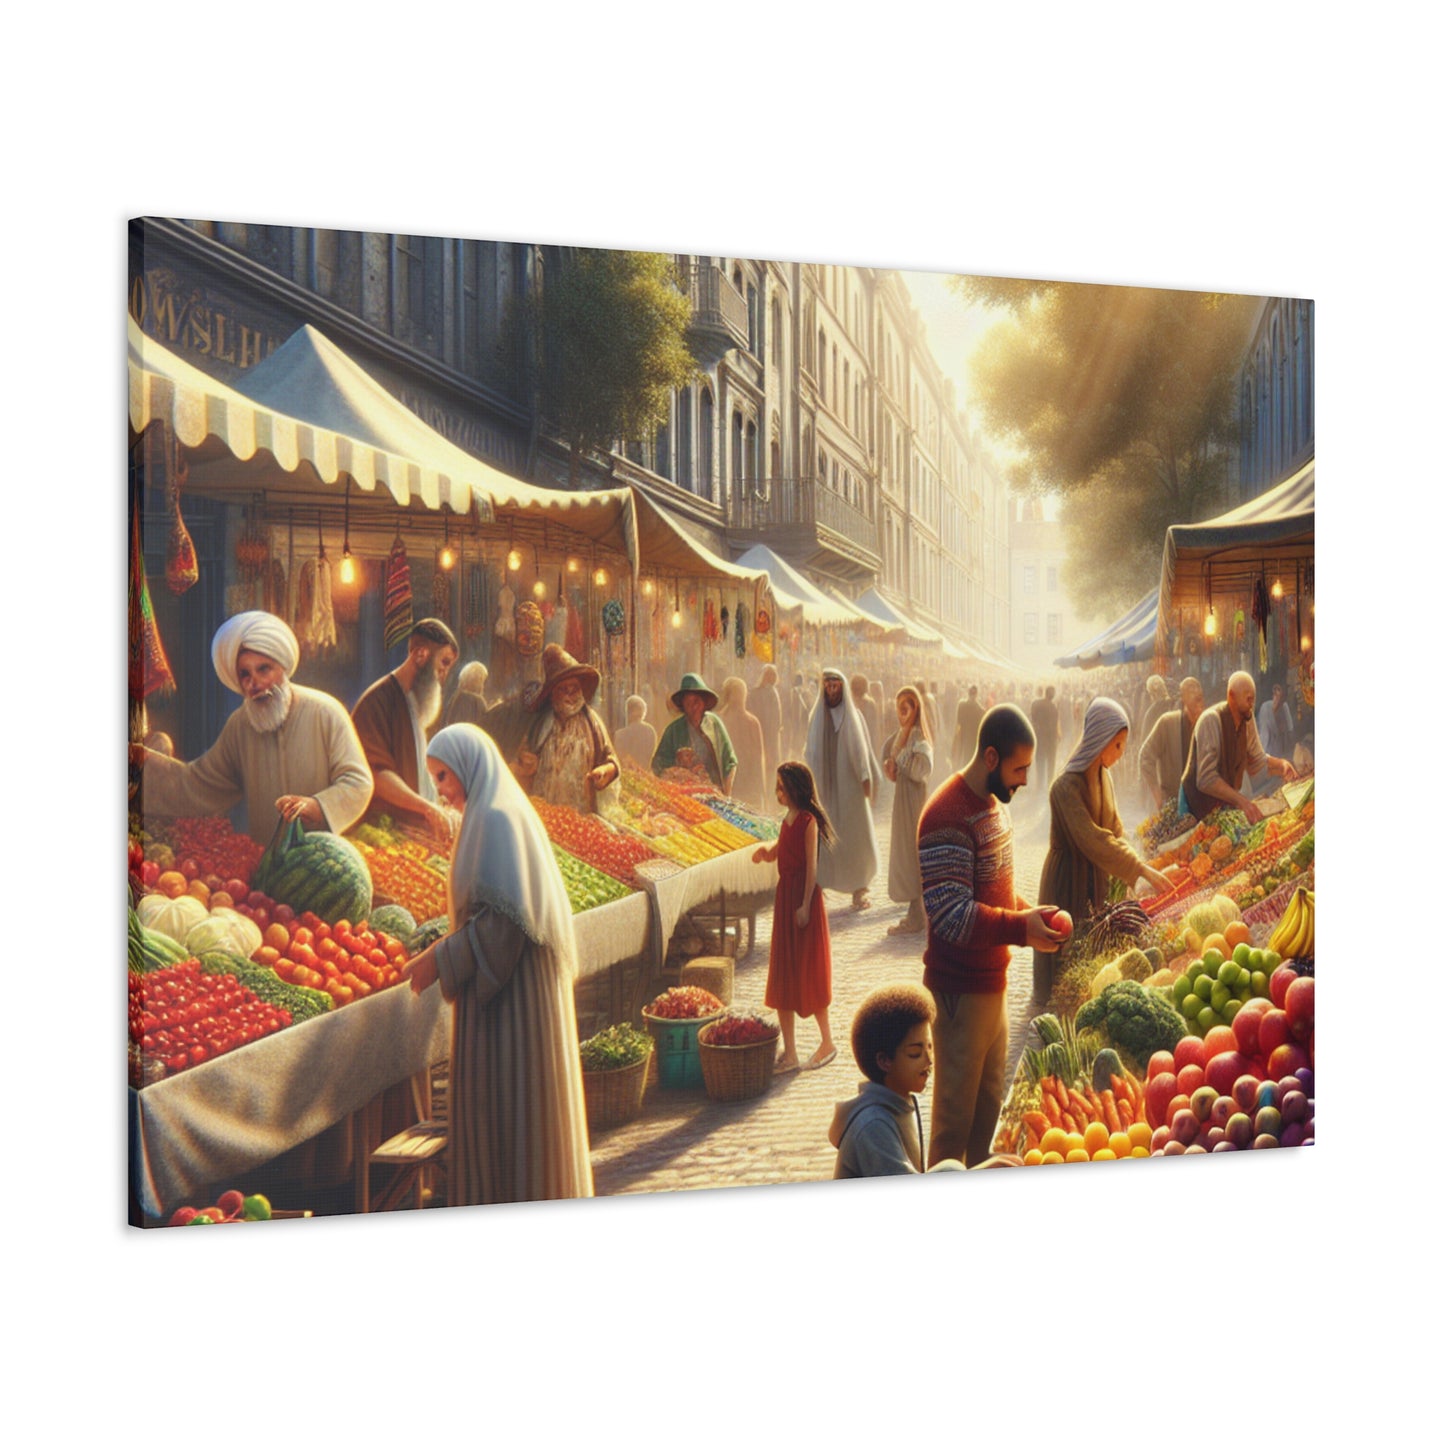 "Sunny Vibes at the Outdoor Market" - The Alien Canva Realism Style